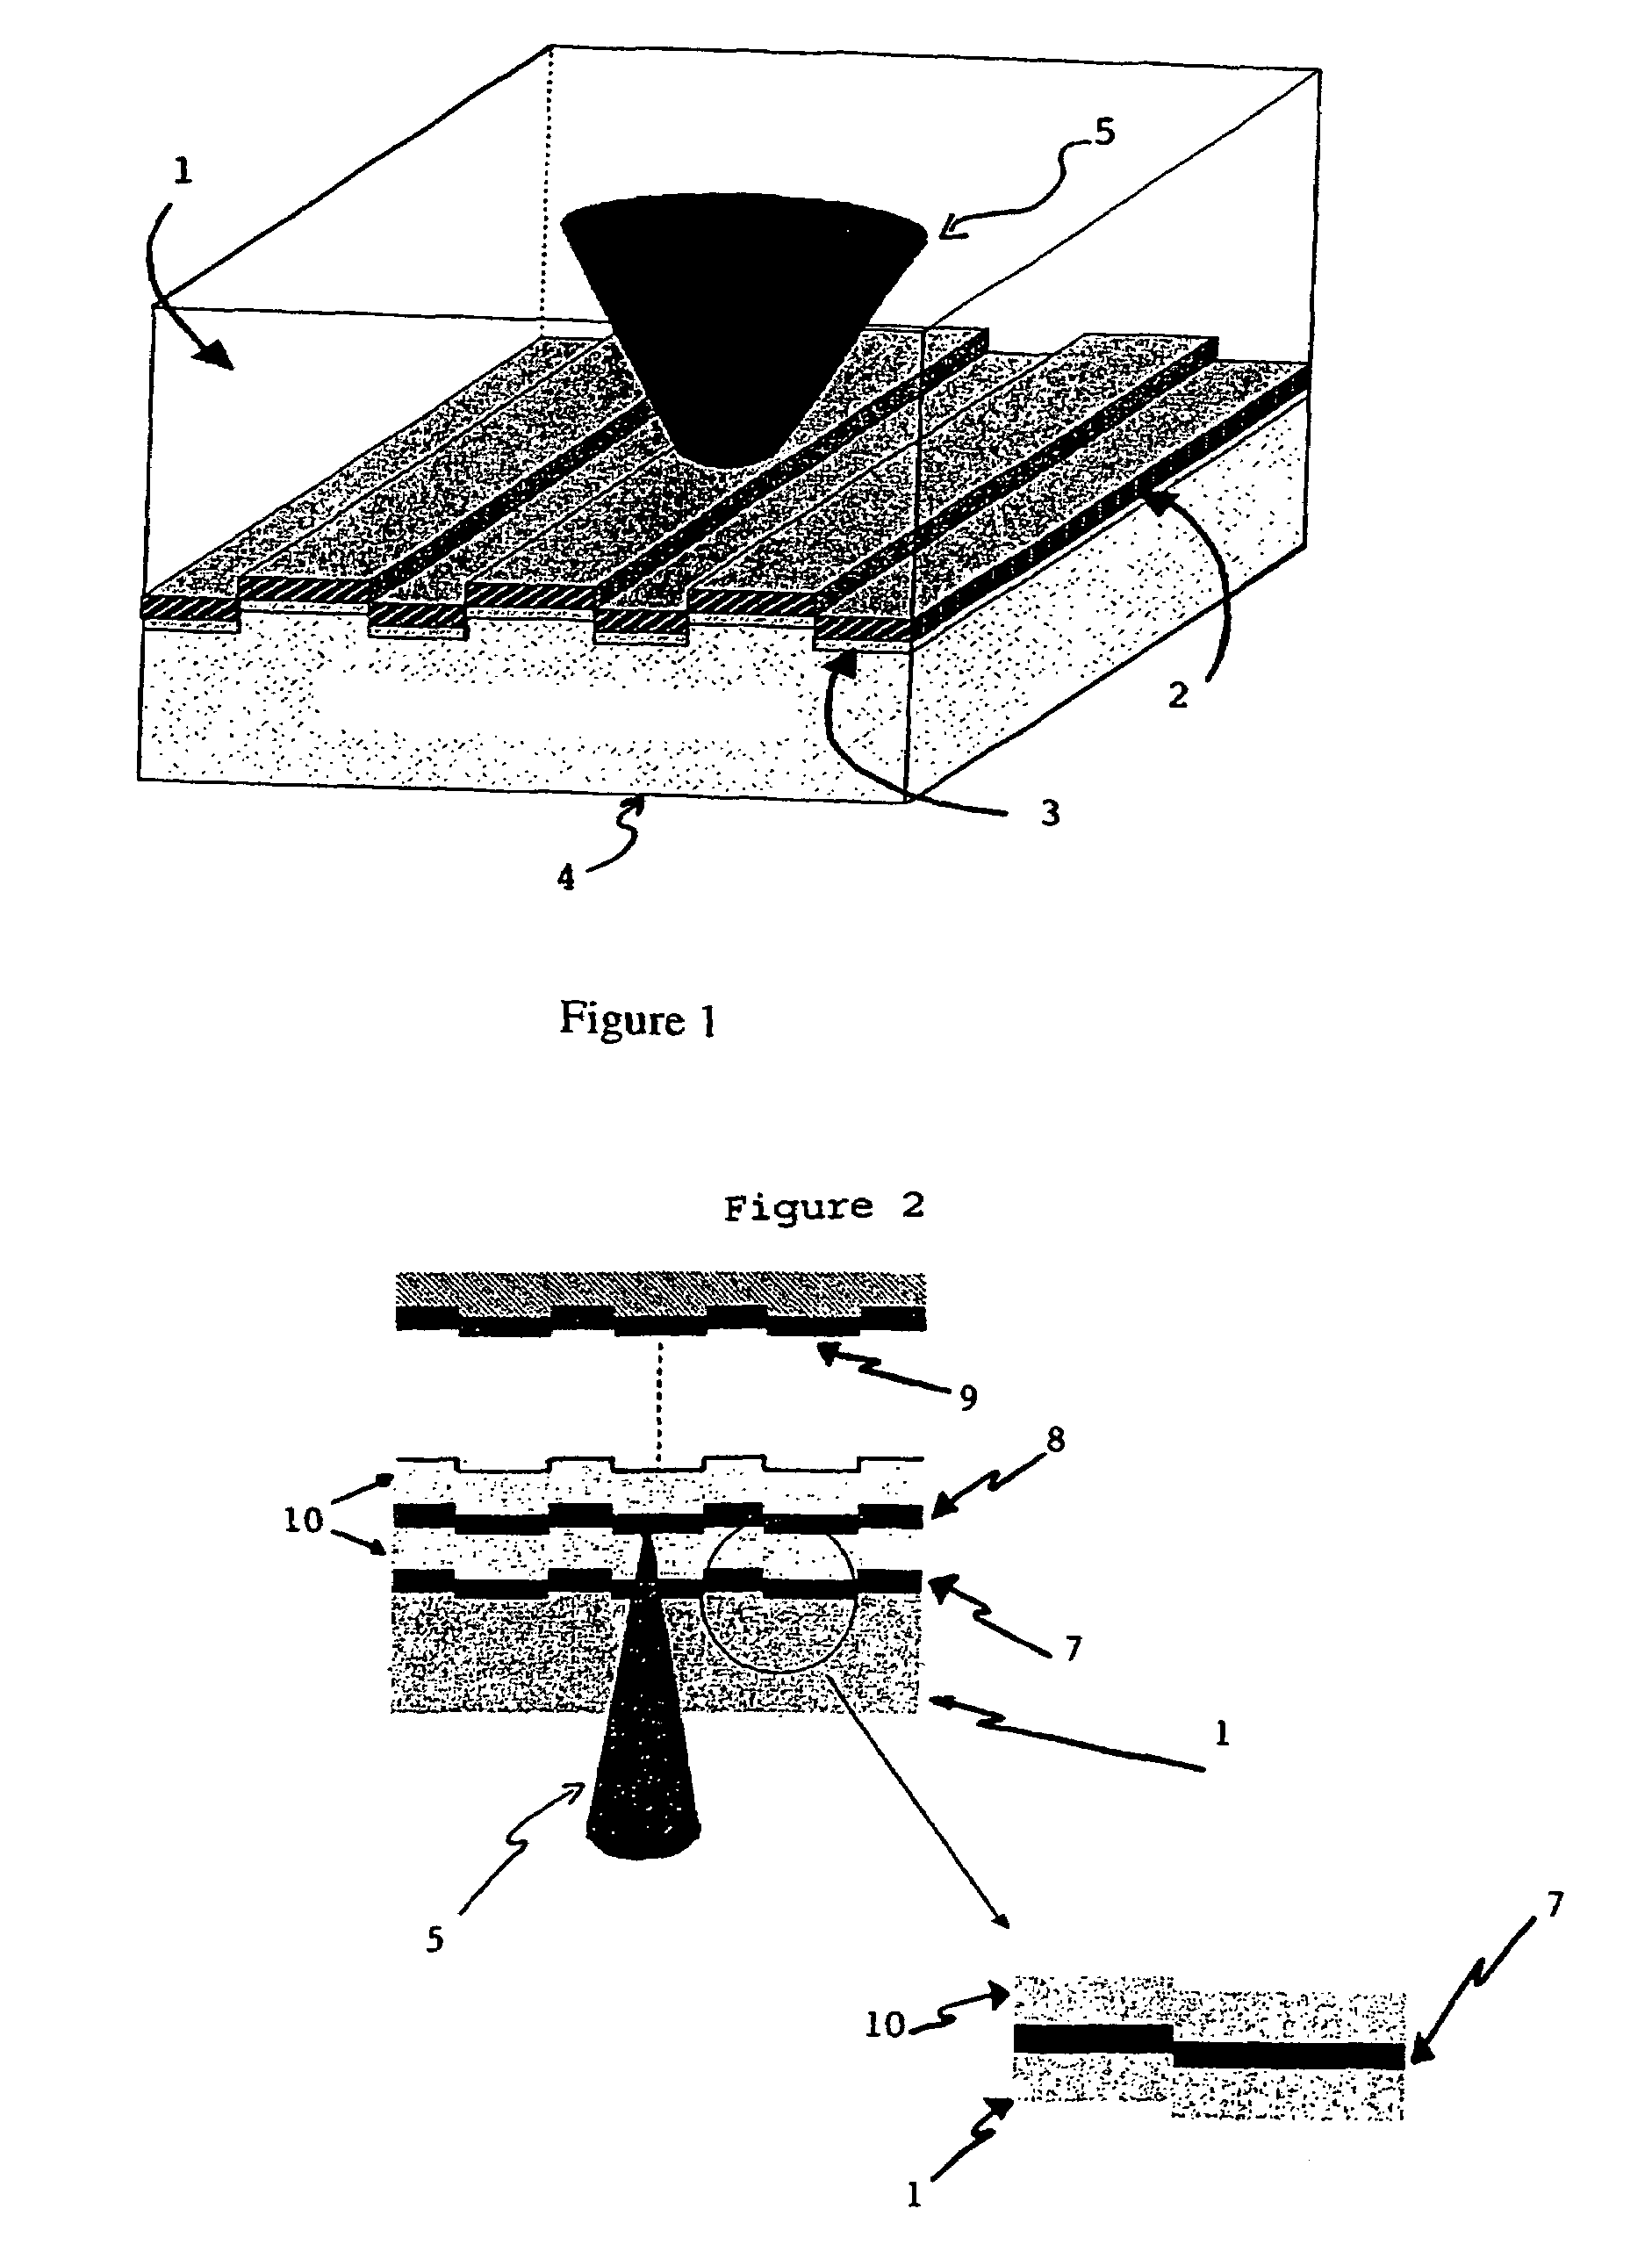 Process for manufacturing a recordable optical disk, optical disk and rewritable layer obtained by the process